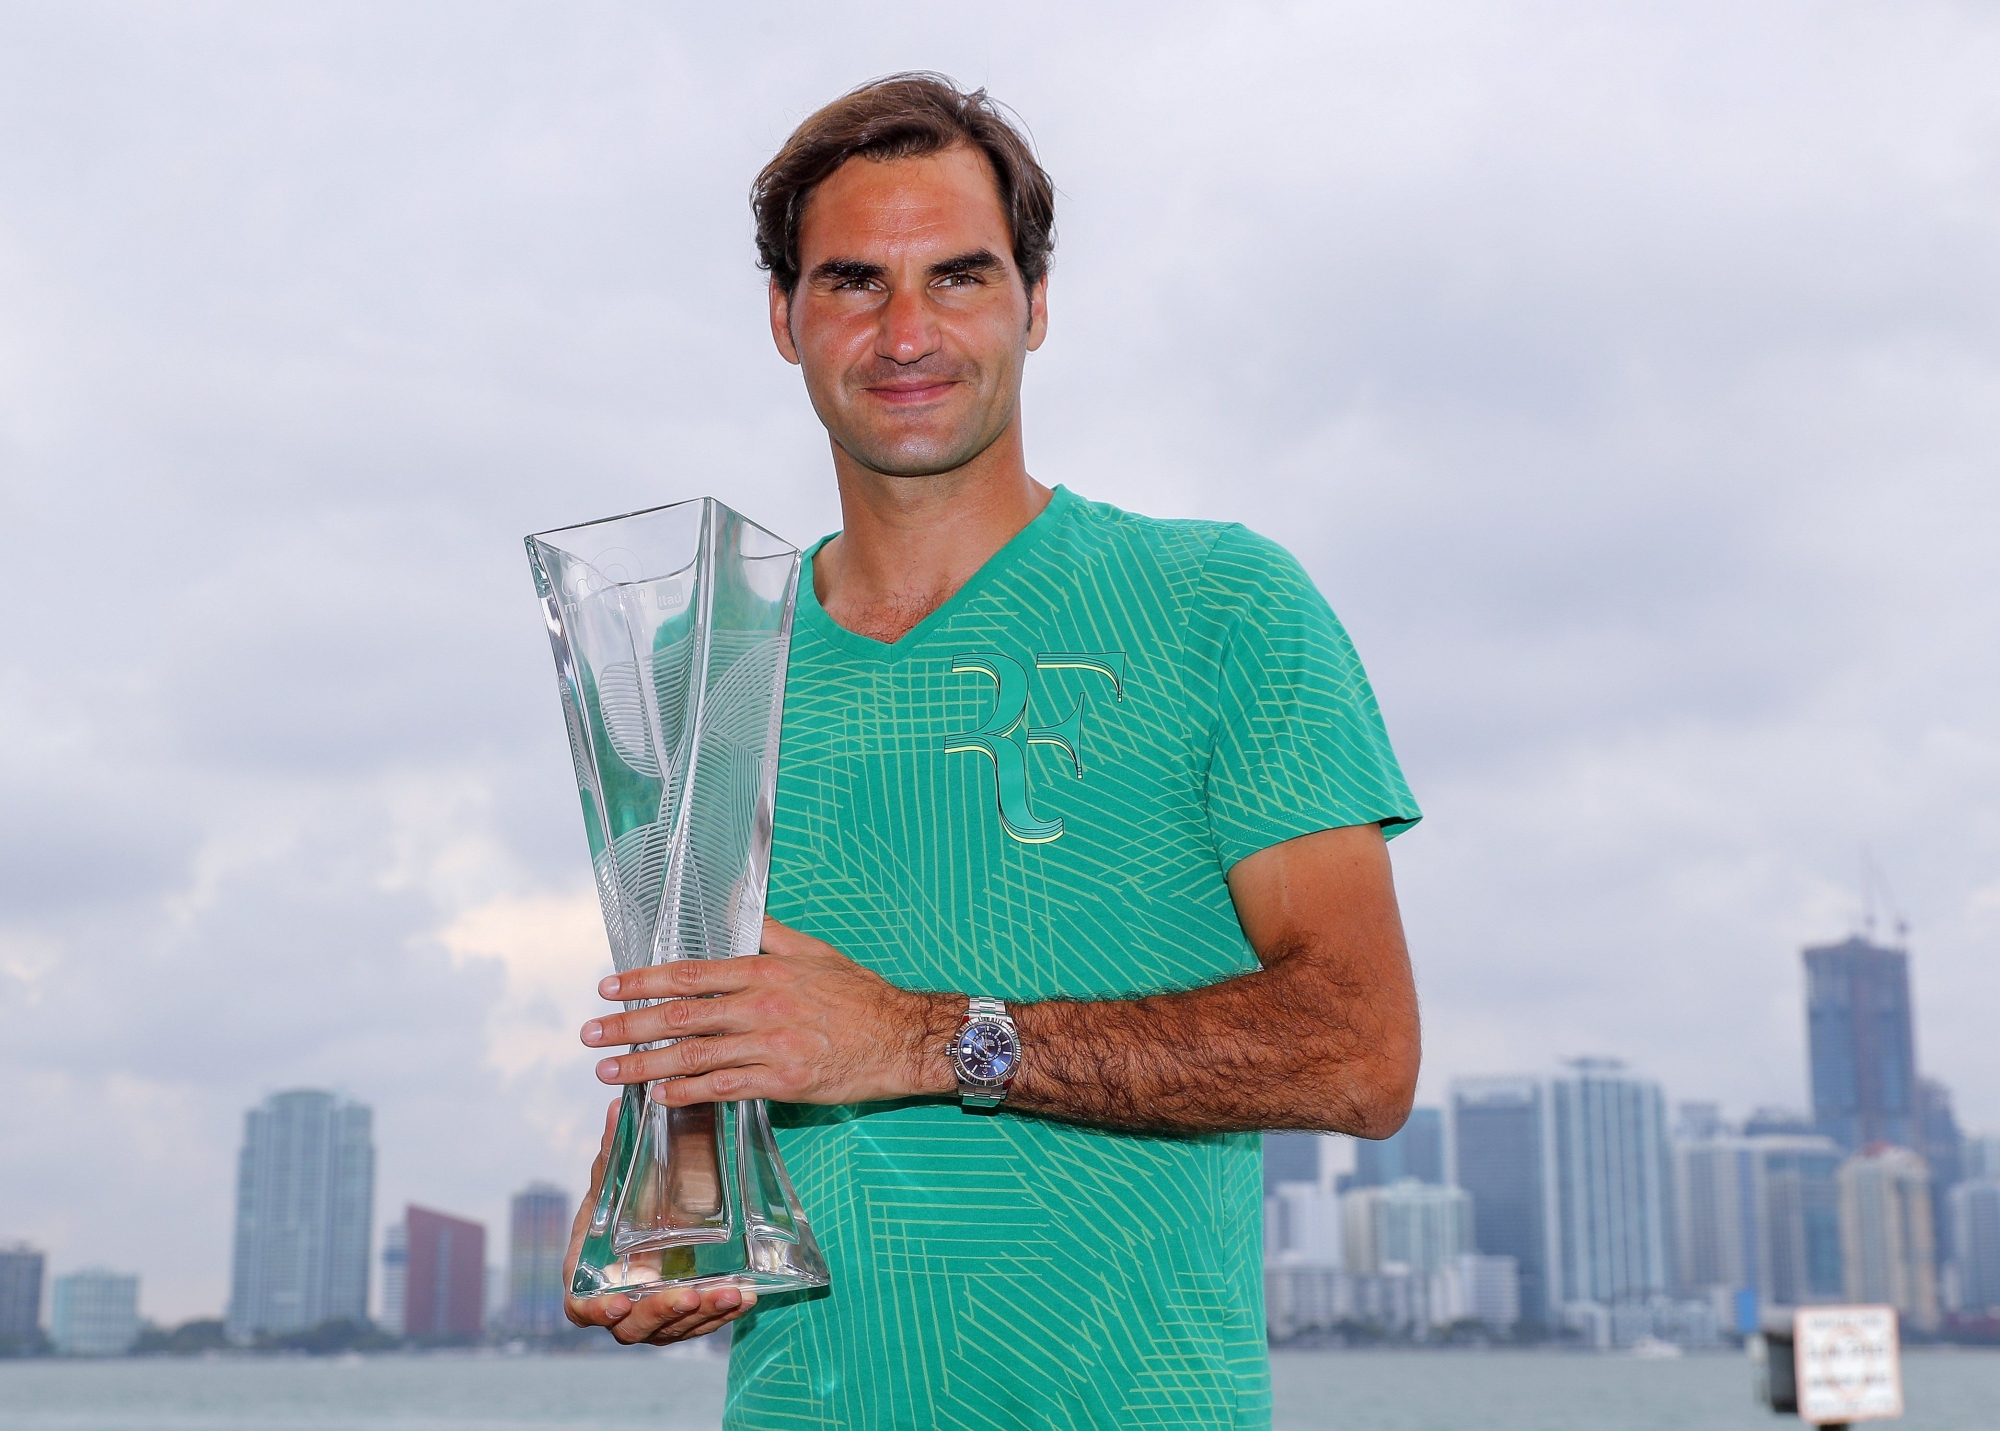 epa05885186 Roger Federer of Switzerland poses with the winner's trophy, with the downtown Miami skyline behind him, after defeating Rafael Nadal of Spain during the men's singles final match at the Miami Open tennis tournament on Key Biscayne, Miami, Florida, USA, 02 April 2017.  EPA/ERIK S. LESSER